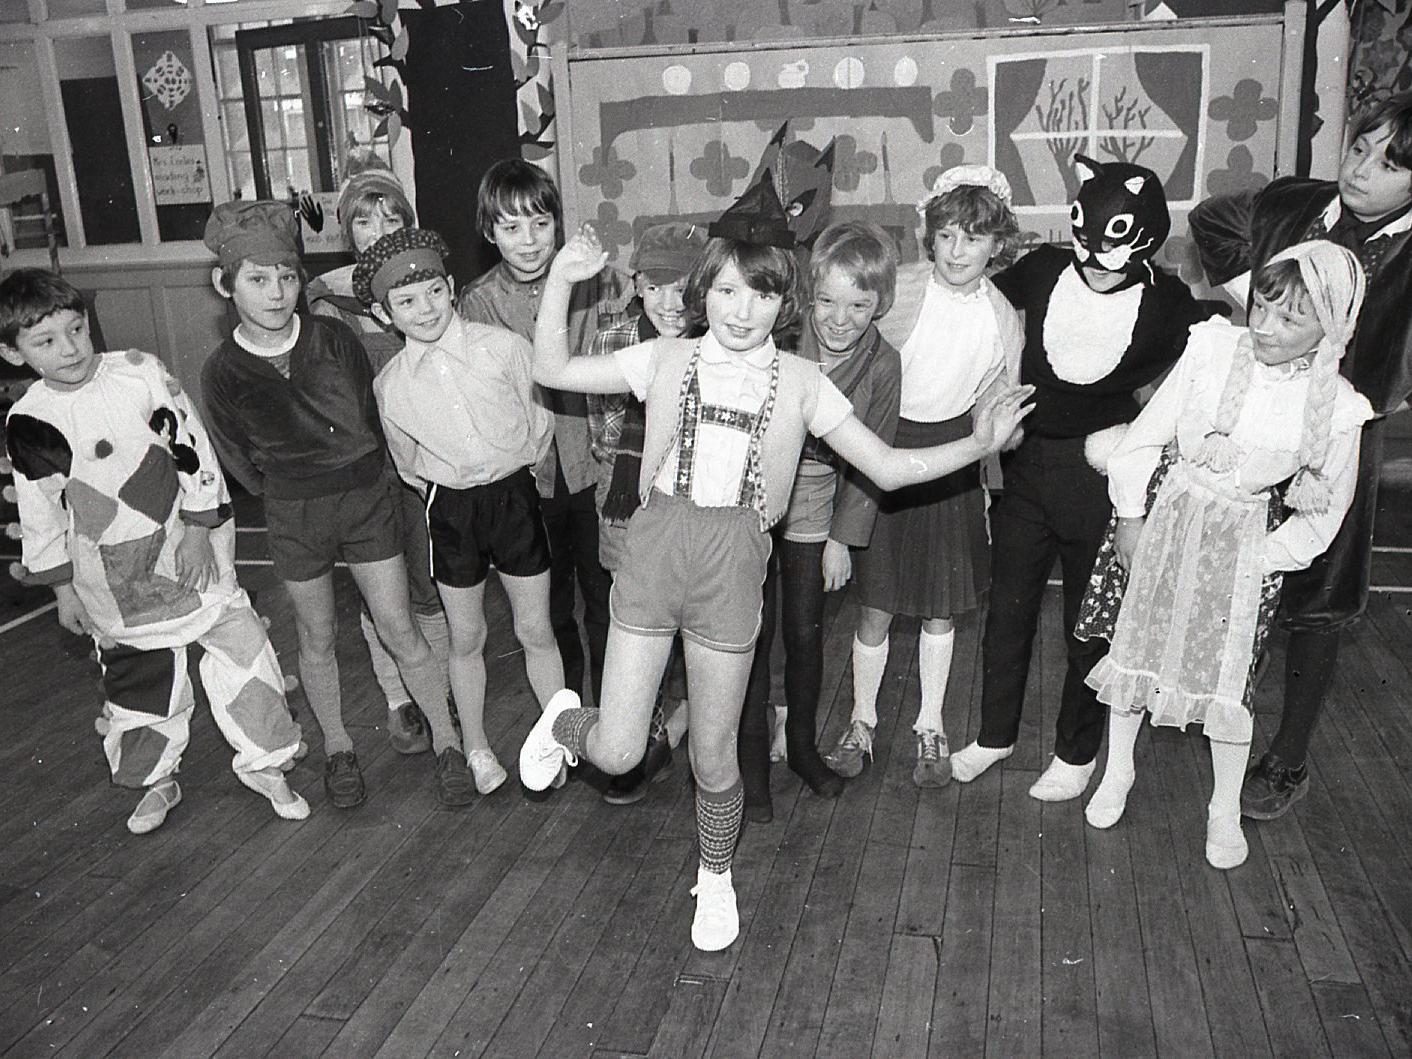 The cast of Pinocchio, presented by pupils at Roebuck School in Ashton, Preston